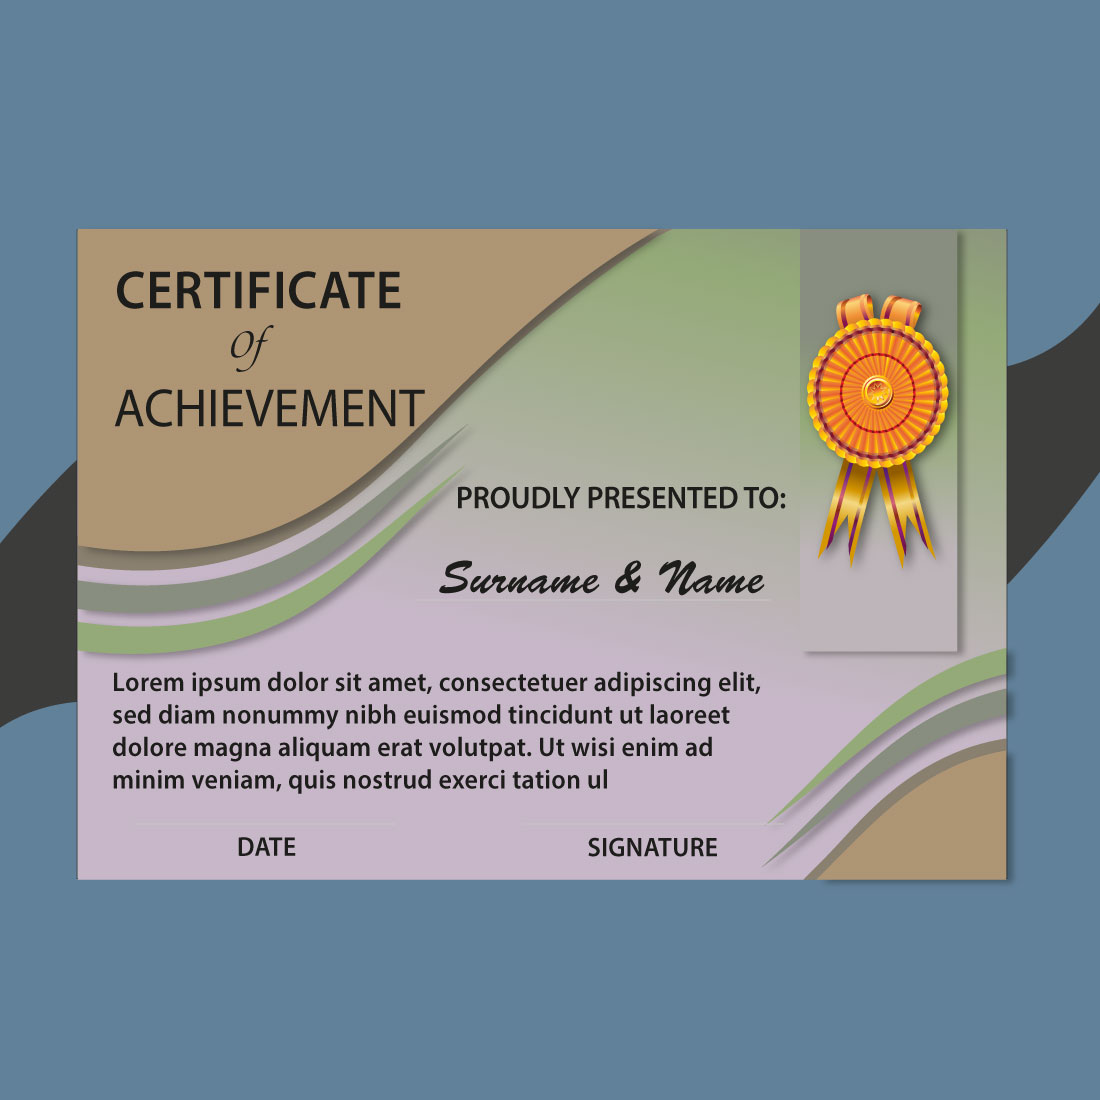 Certificate for Courses and Events cover image.